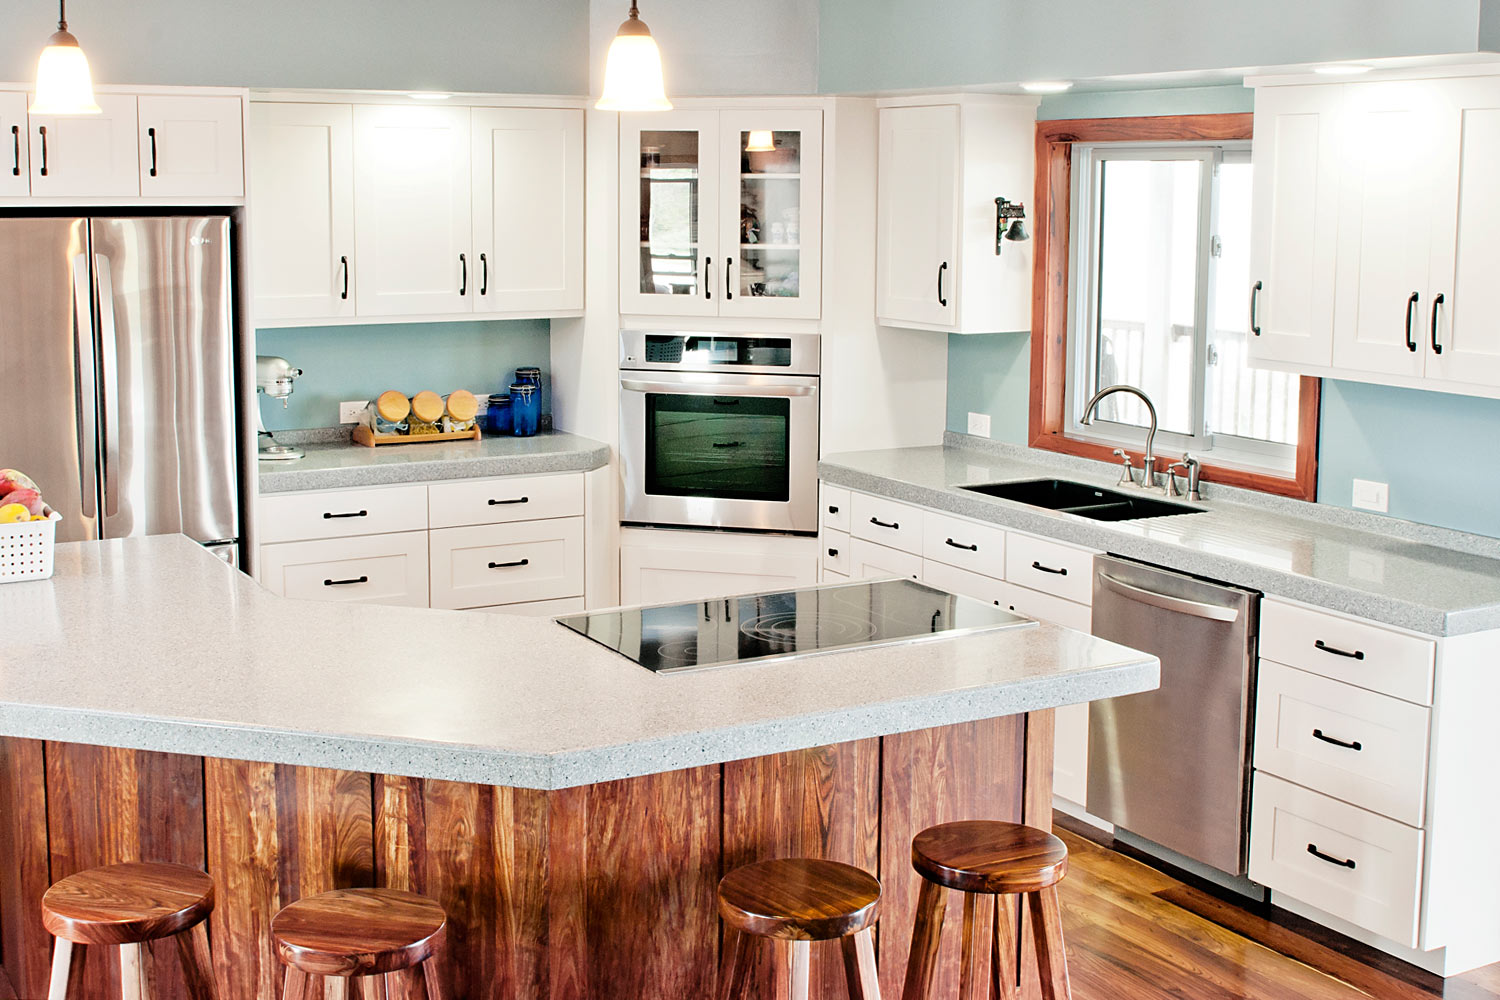 Kitchen cabinets and furniture in Belize